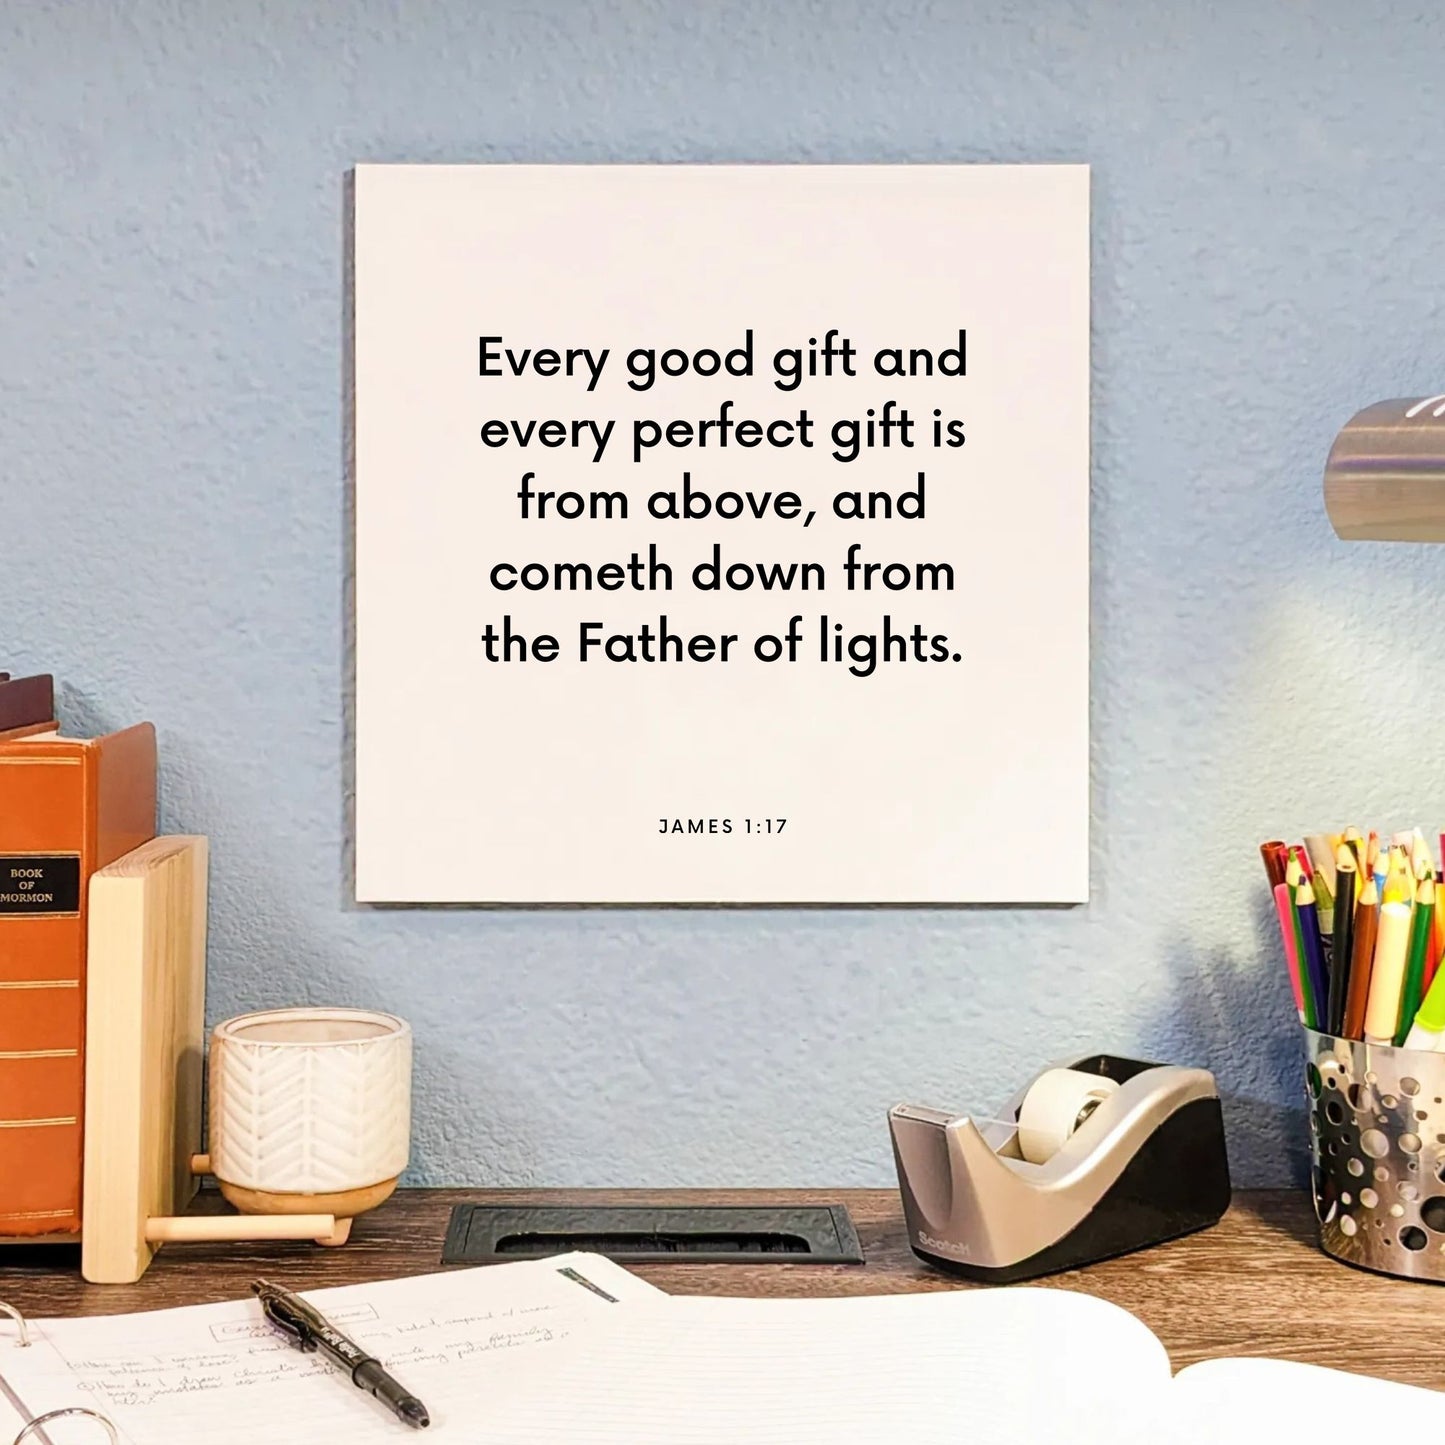 Desk mouting of the scripture tile for James 1:17 - "Every good gift and every perfect gift is from above"